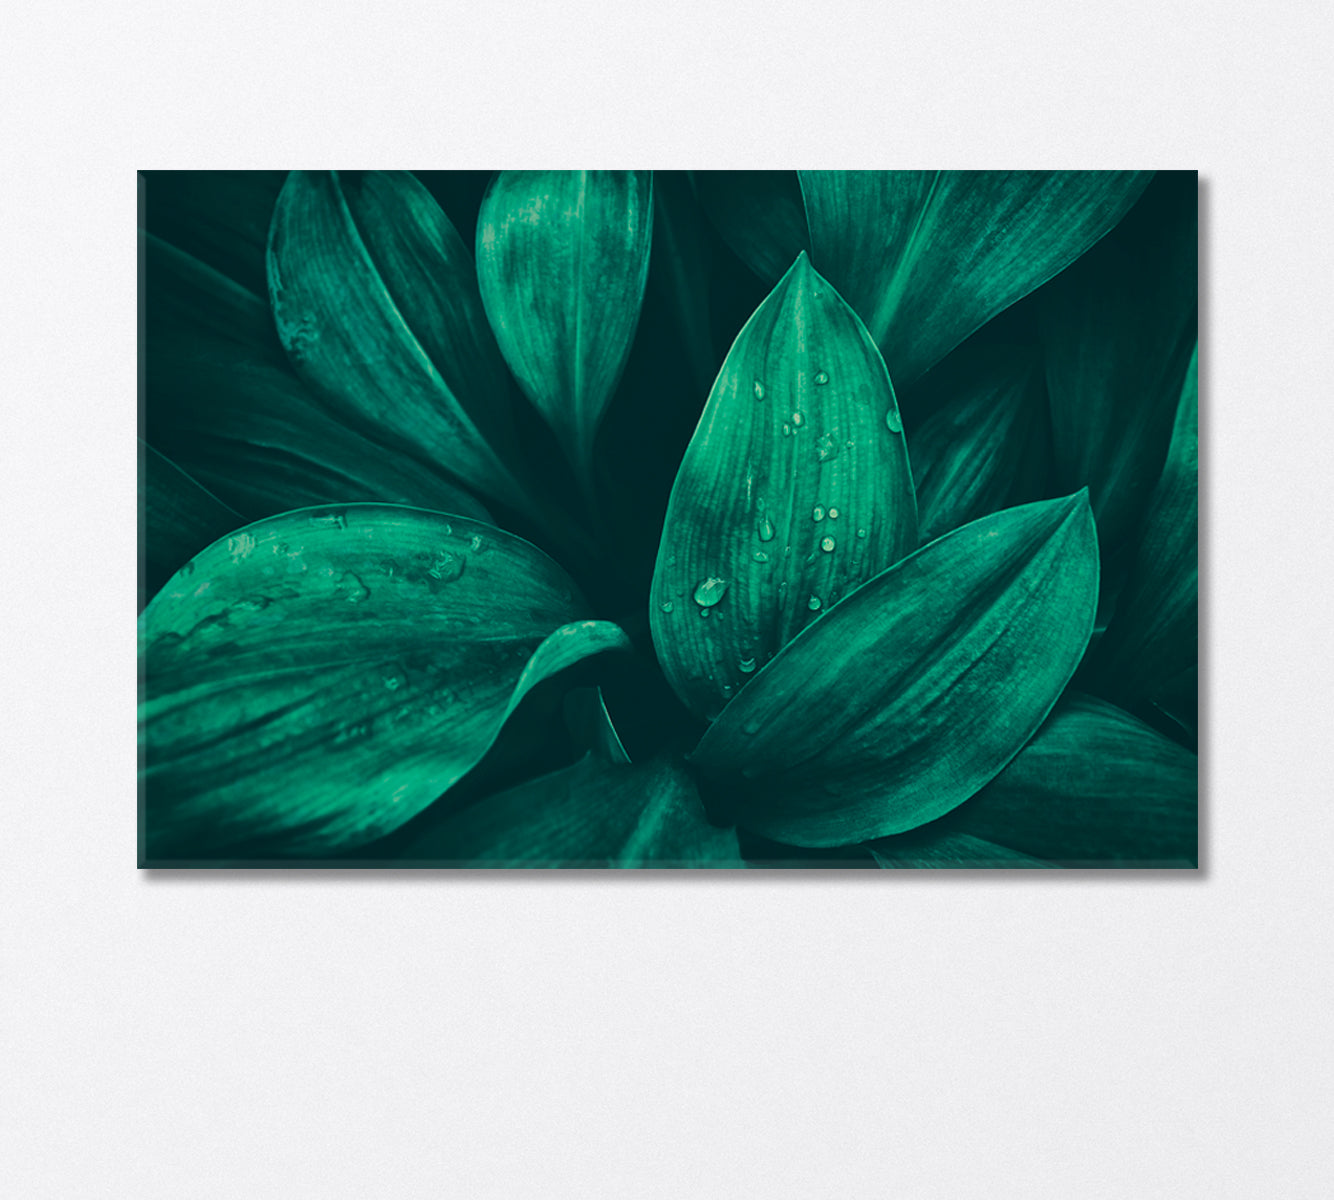 Water Droplets on Green Foliage in Tropical Rainforest Canvas Print-Canvas Print-CetArt-1 Panel-24x16 inches-CetArt